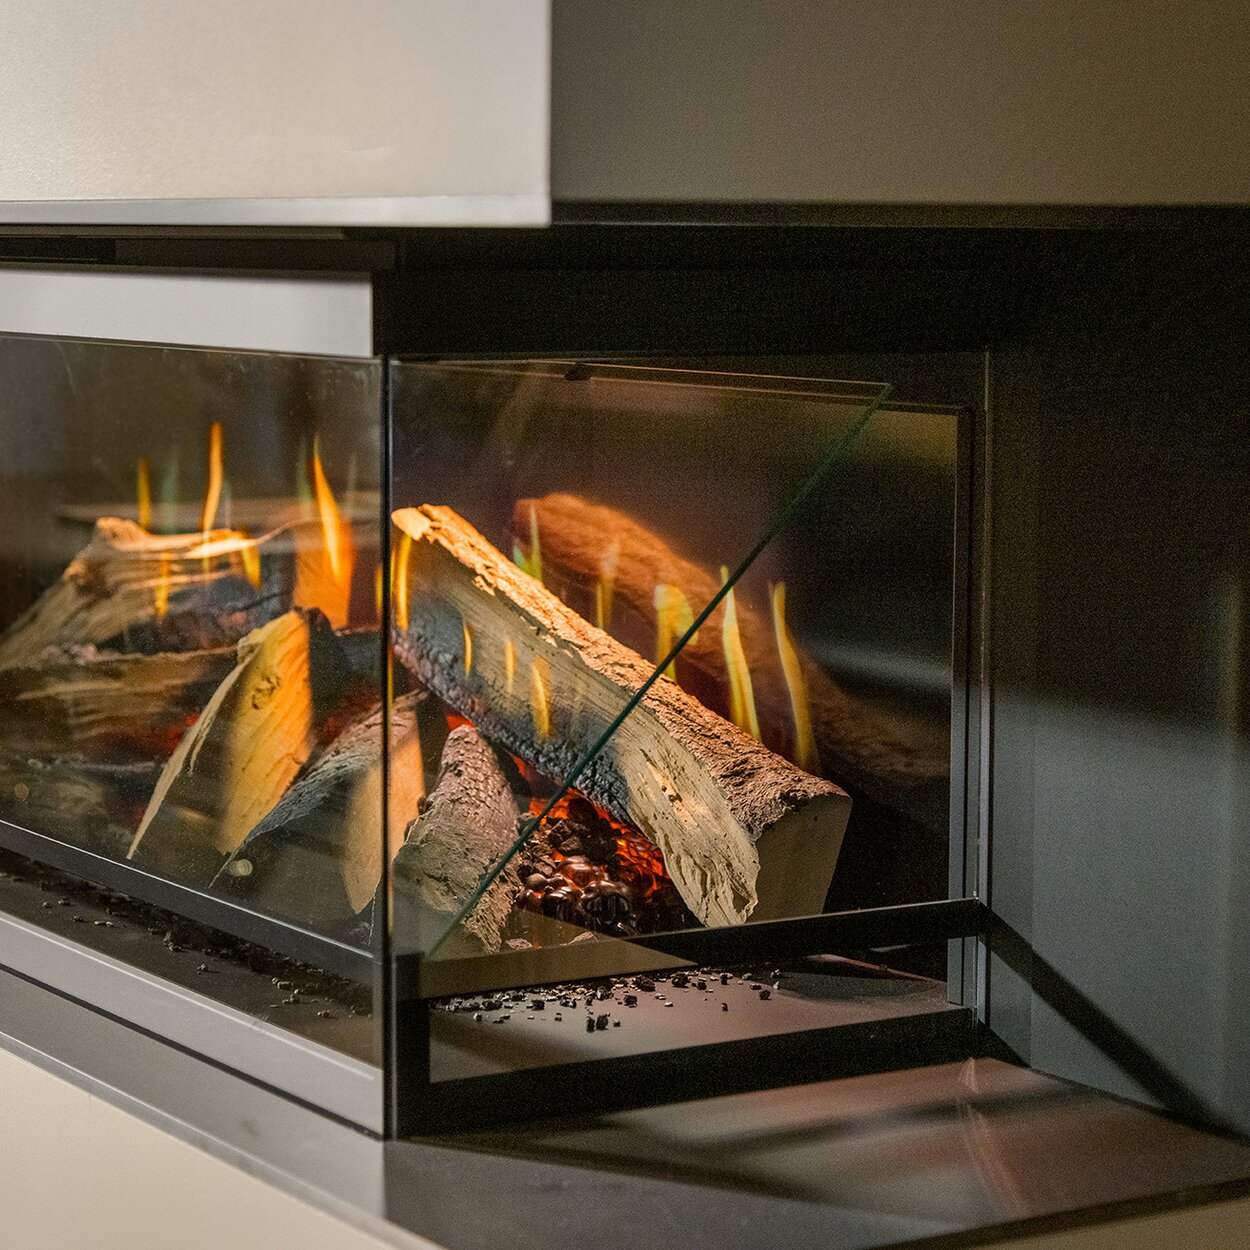 The 3-sided electric fireplace E-One 130 S from Kalfire has elegant steel elements on the frame.